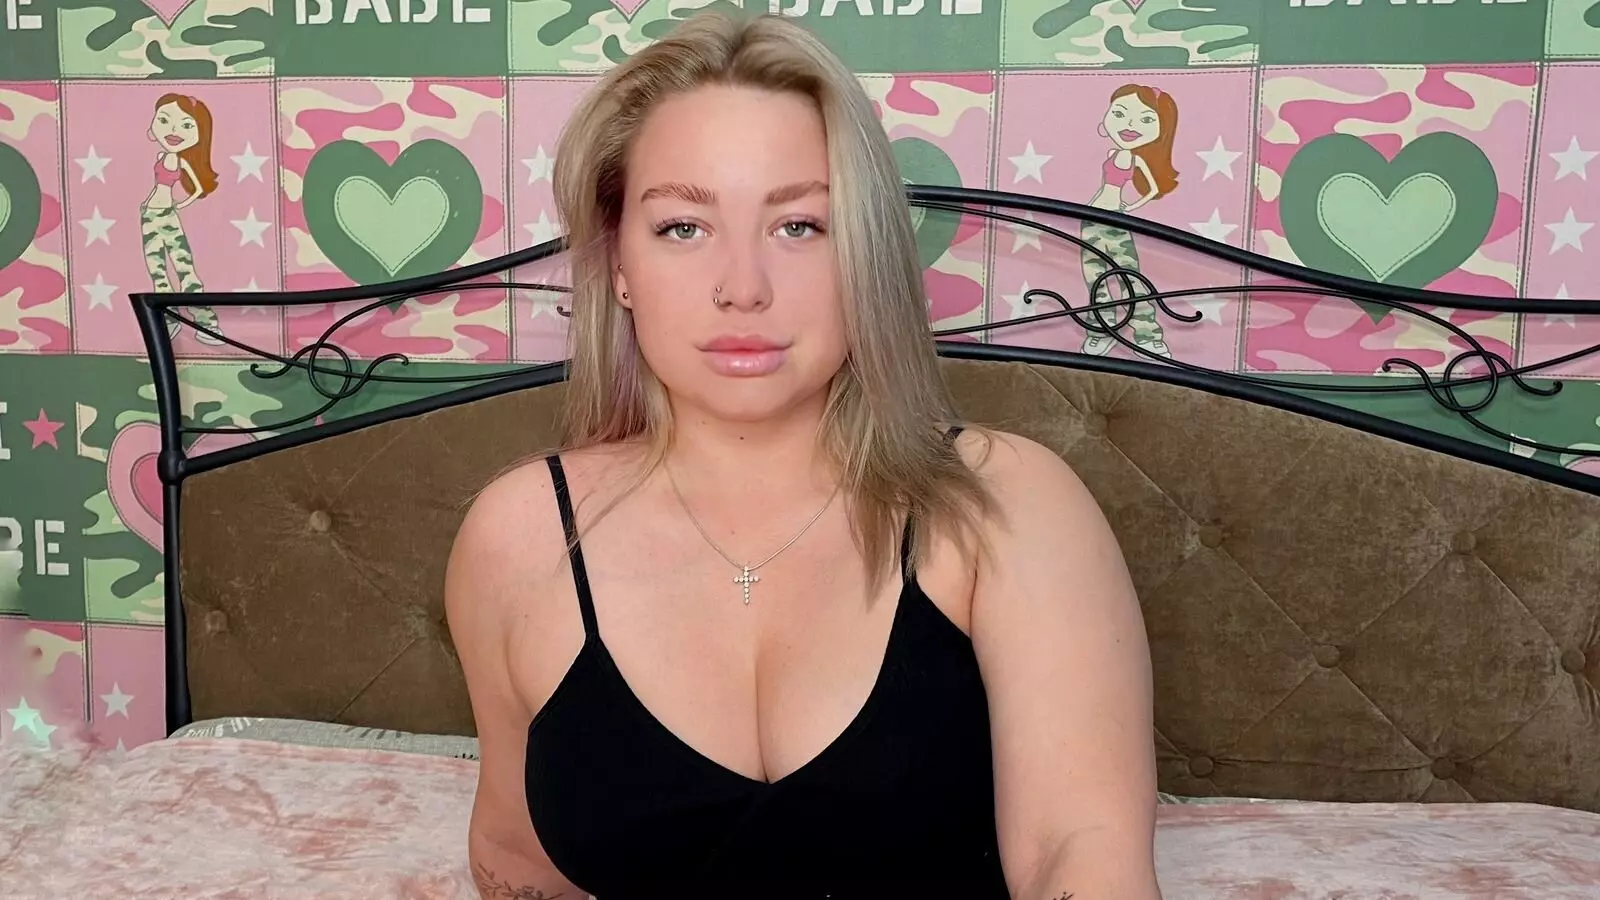  RELATED VIDEOS - WEBCAM HannahRodgers STRIPS AND MASTURBATES